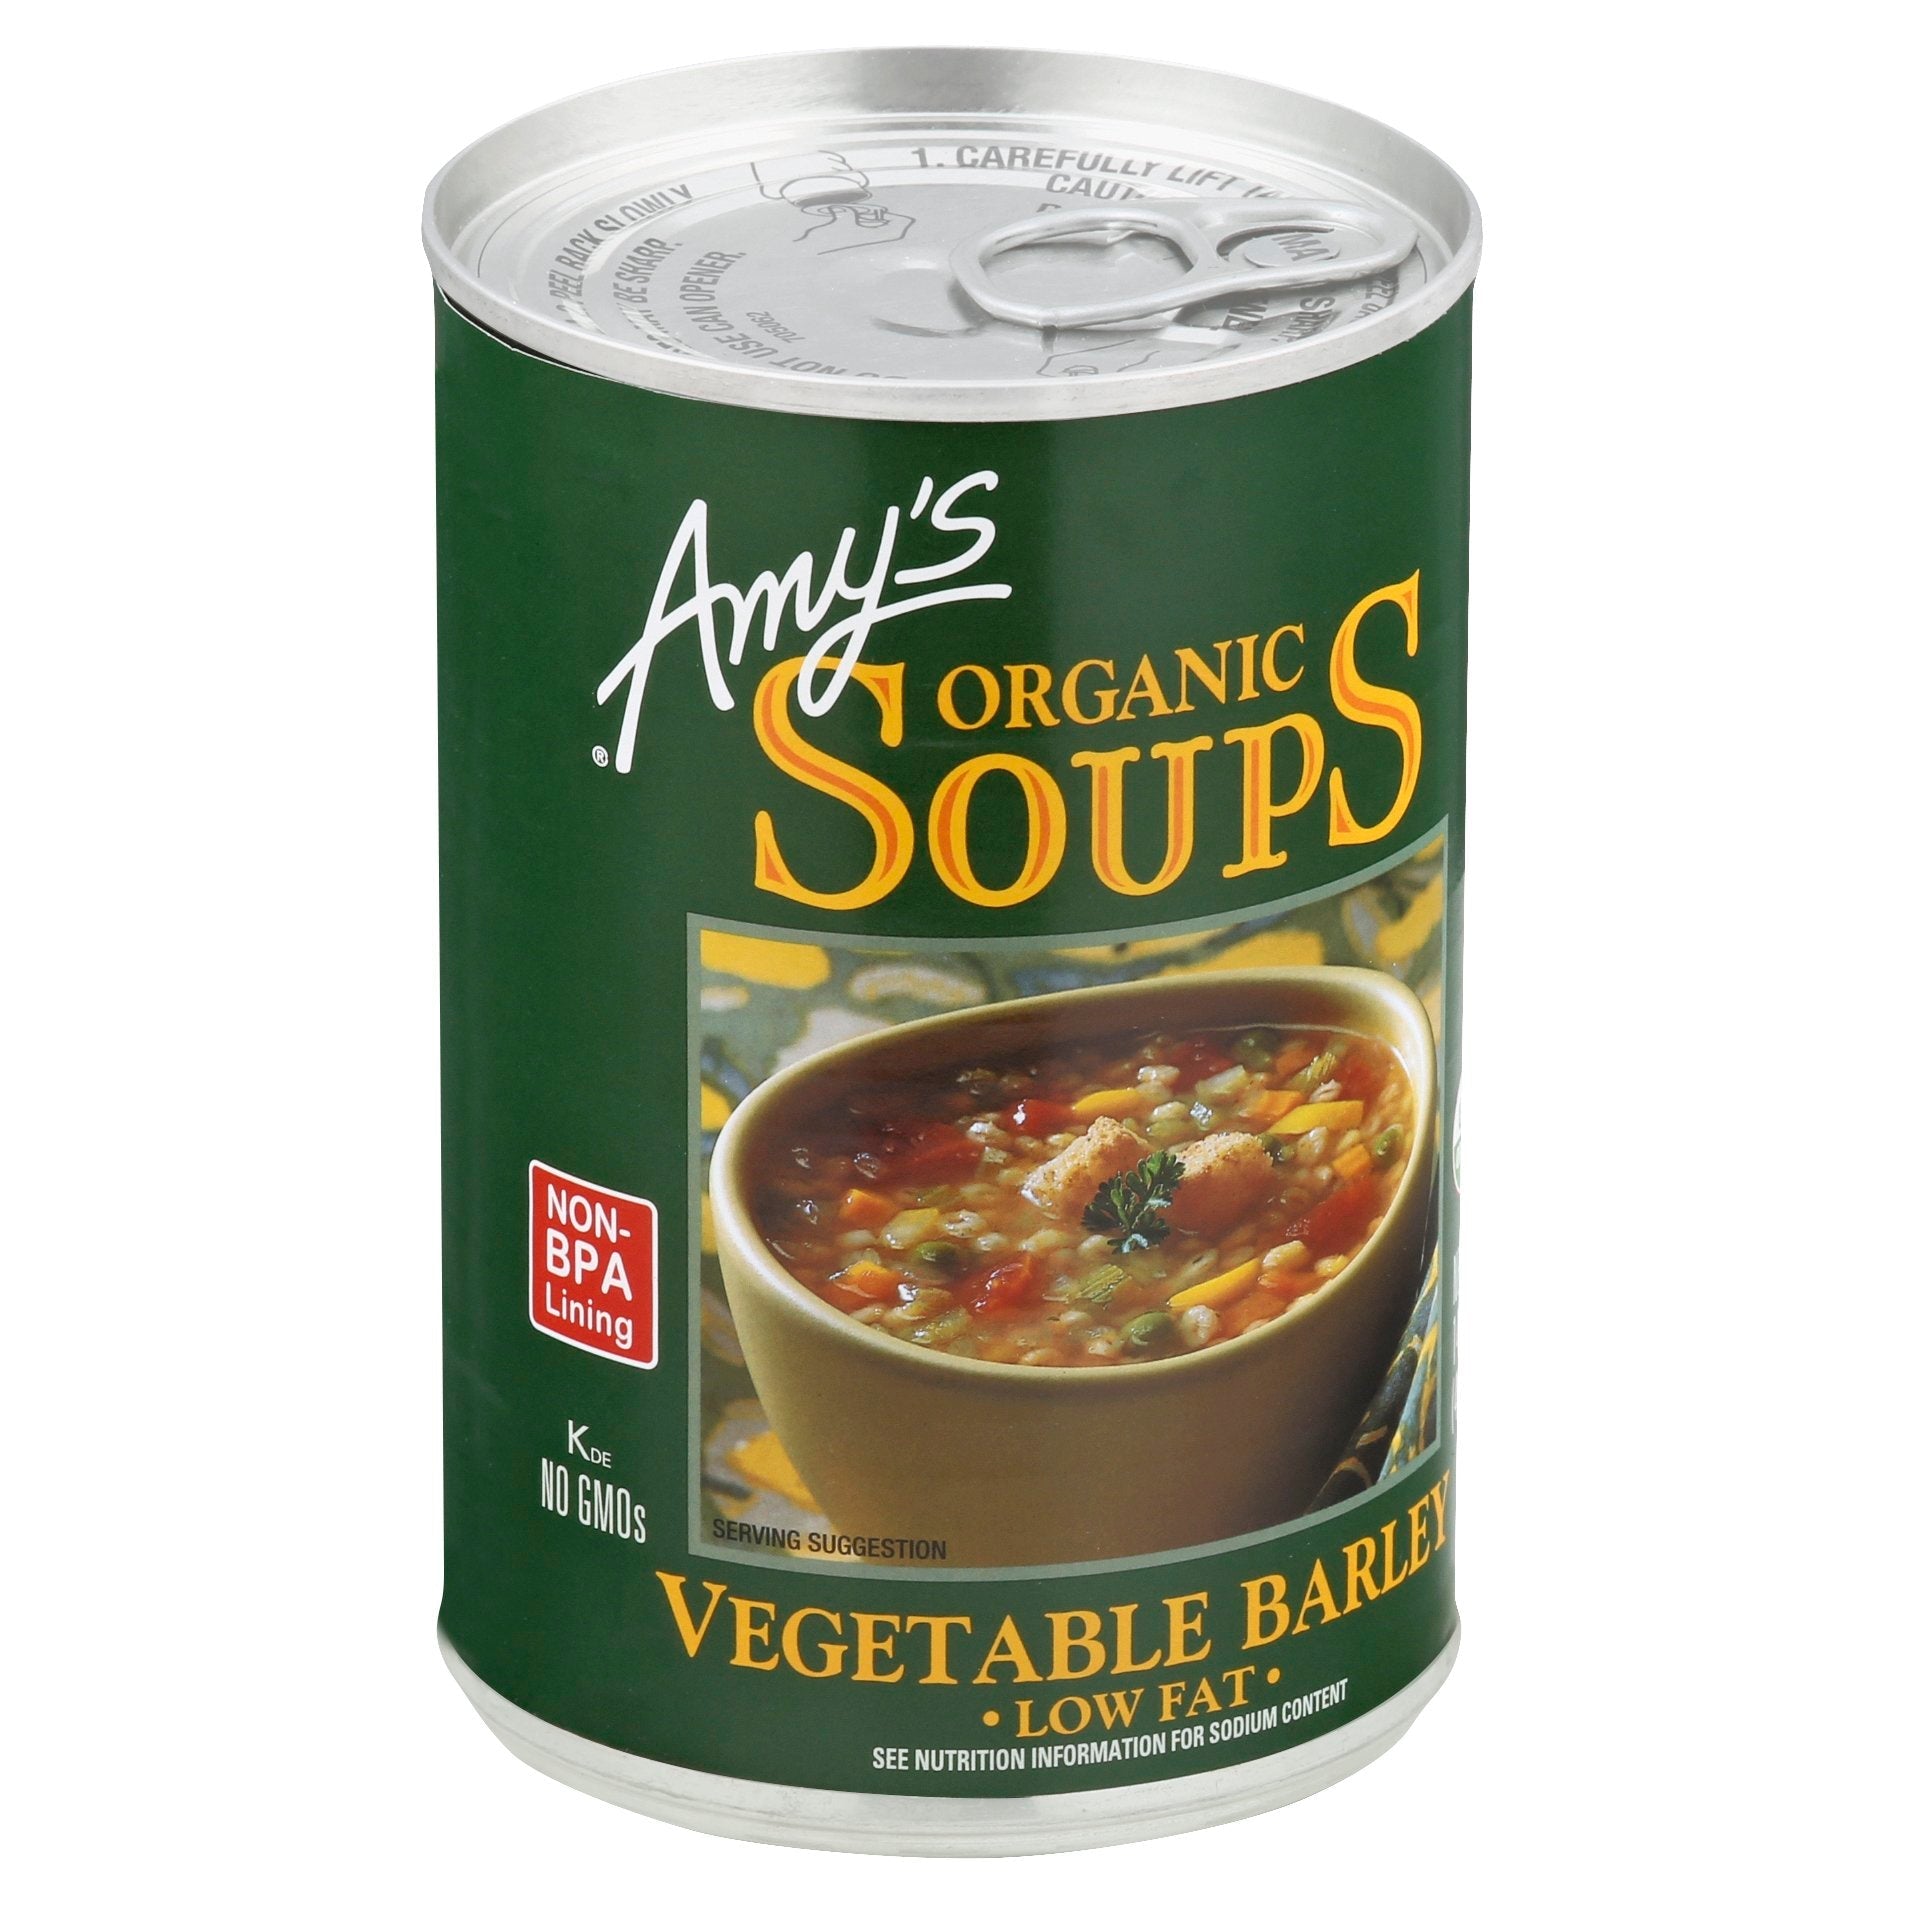 Amy's Hearty French Country Vegetable Soup, Organic - 12 x 14.4 oz